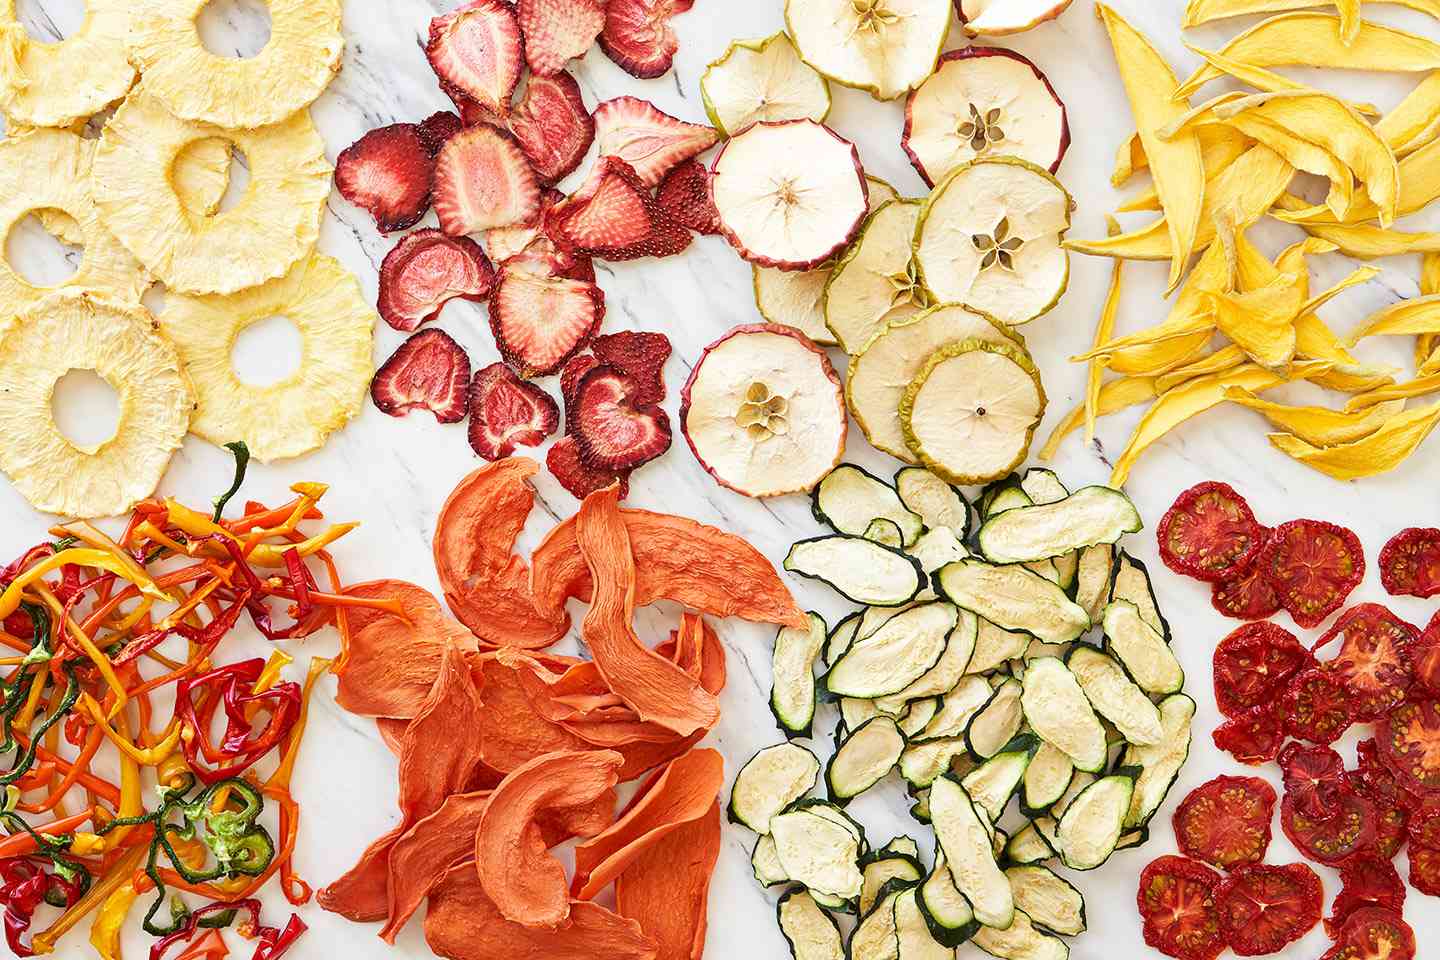 How To Dehydrate Vegetables